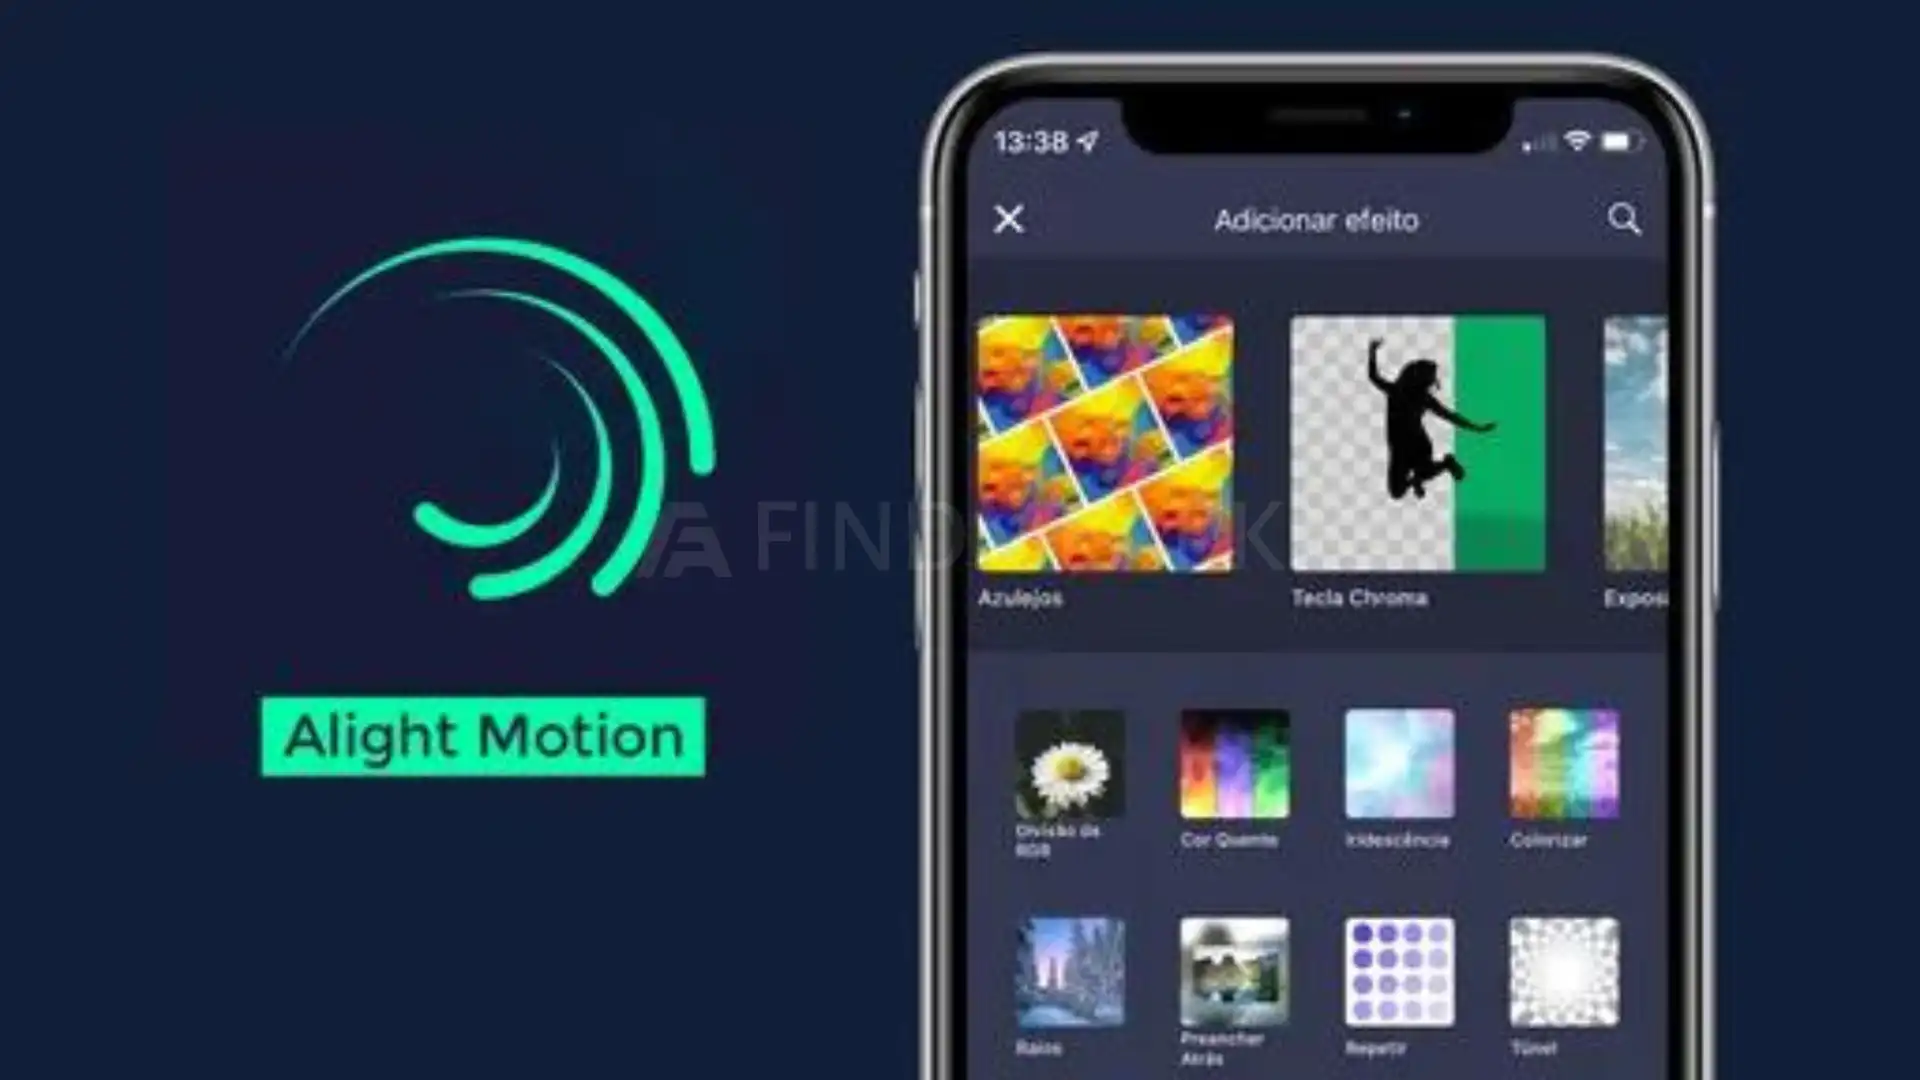 Alight Motion feature image